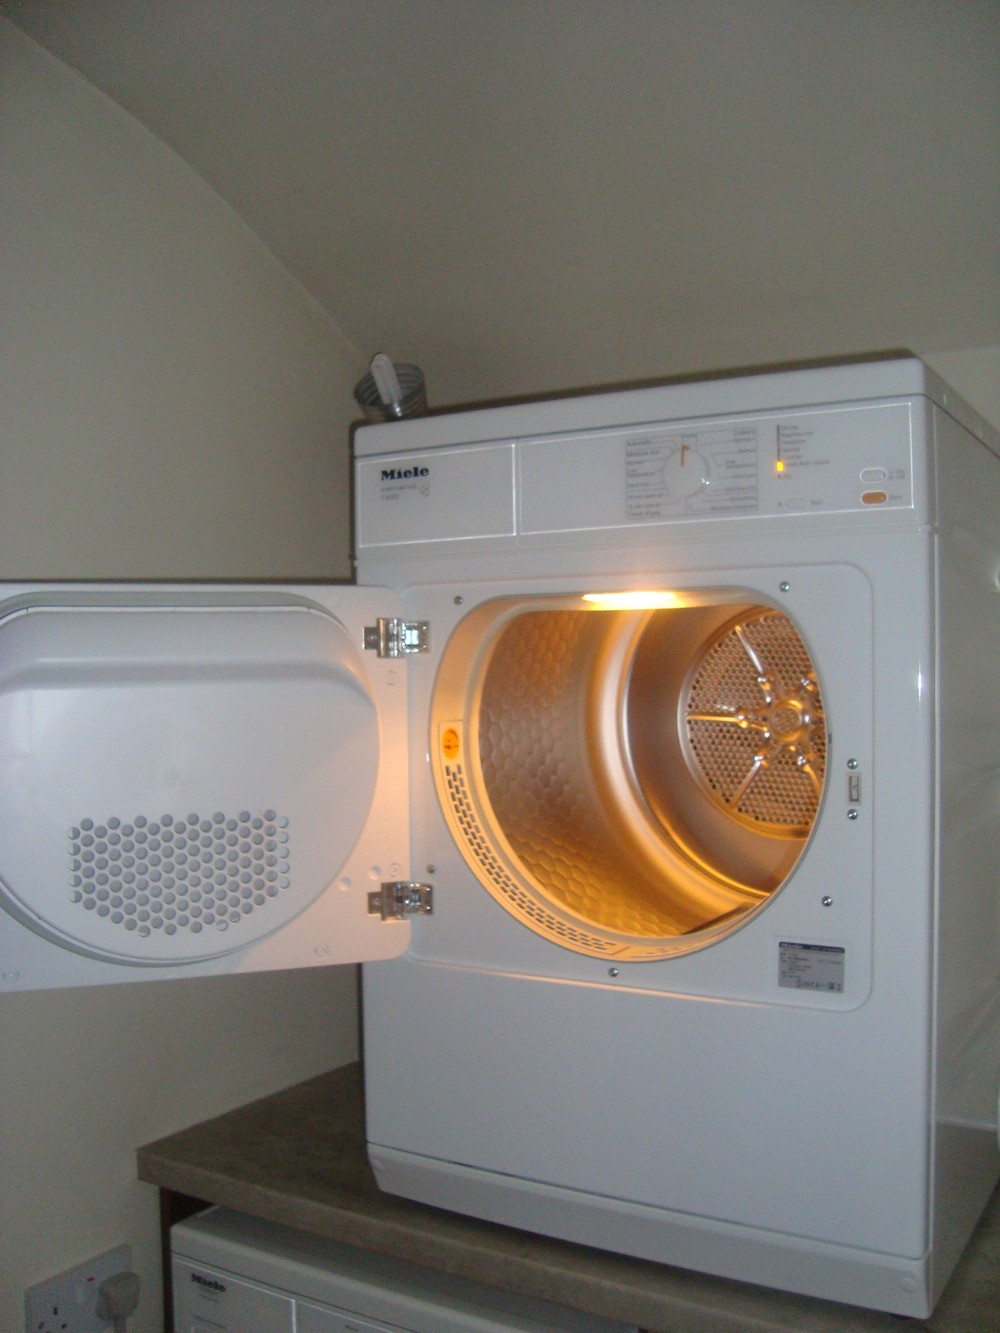 Miele T8302 vented dryer